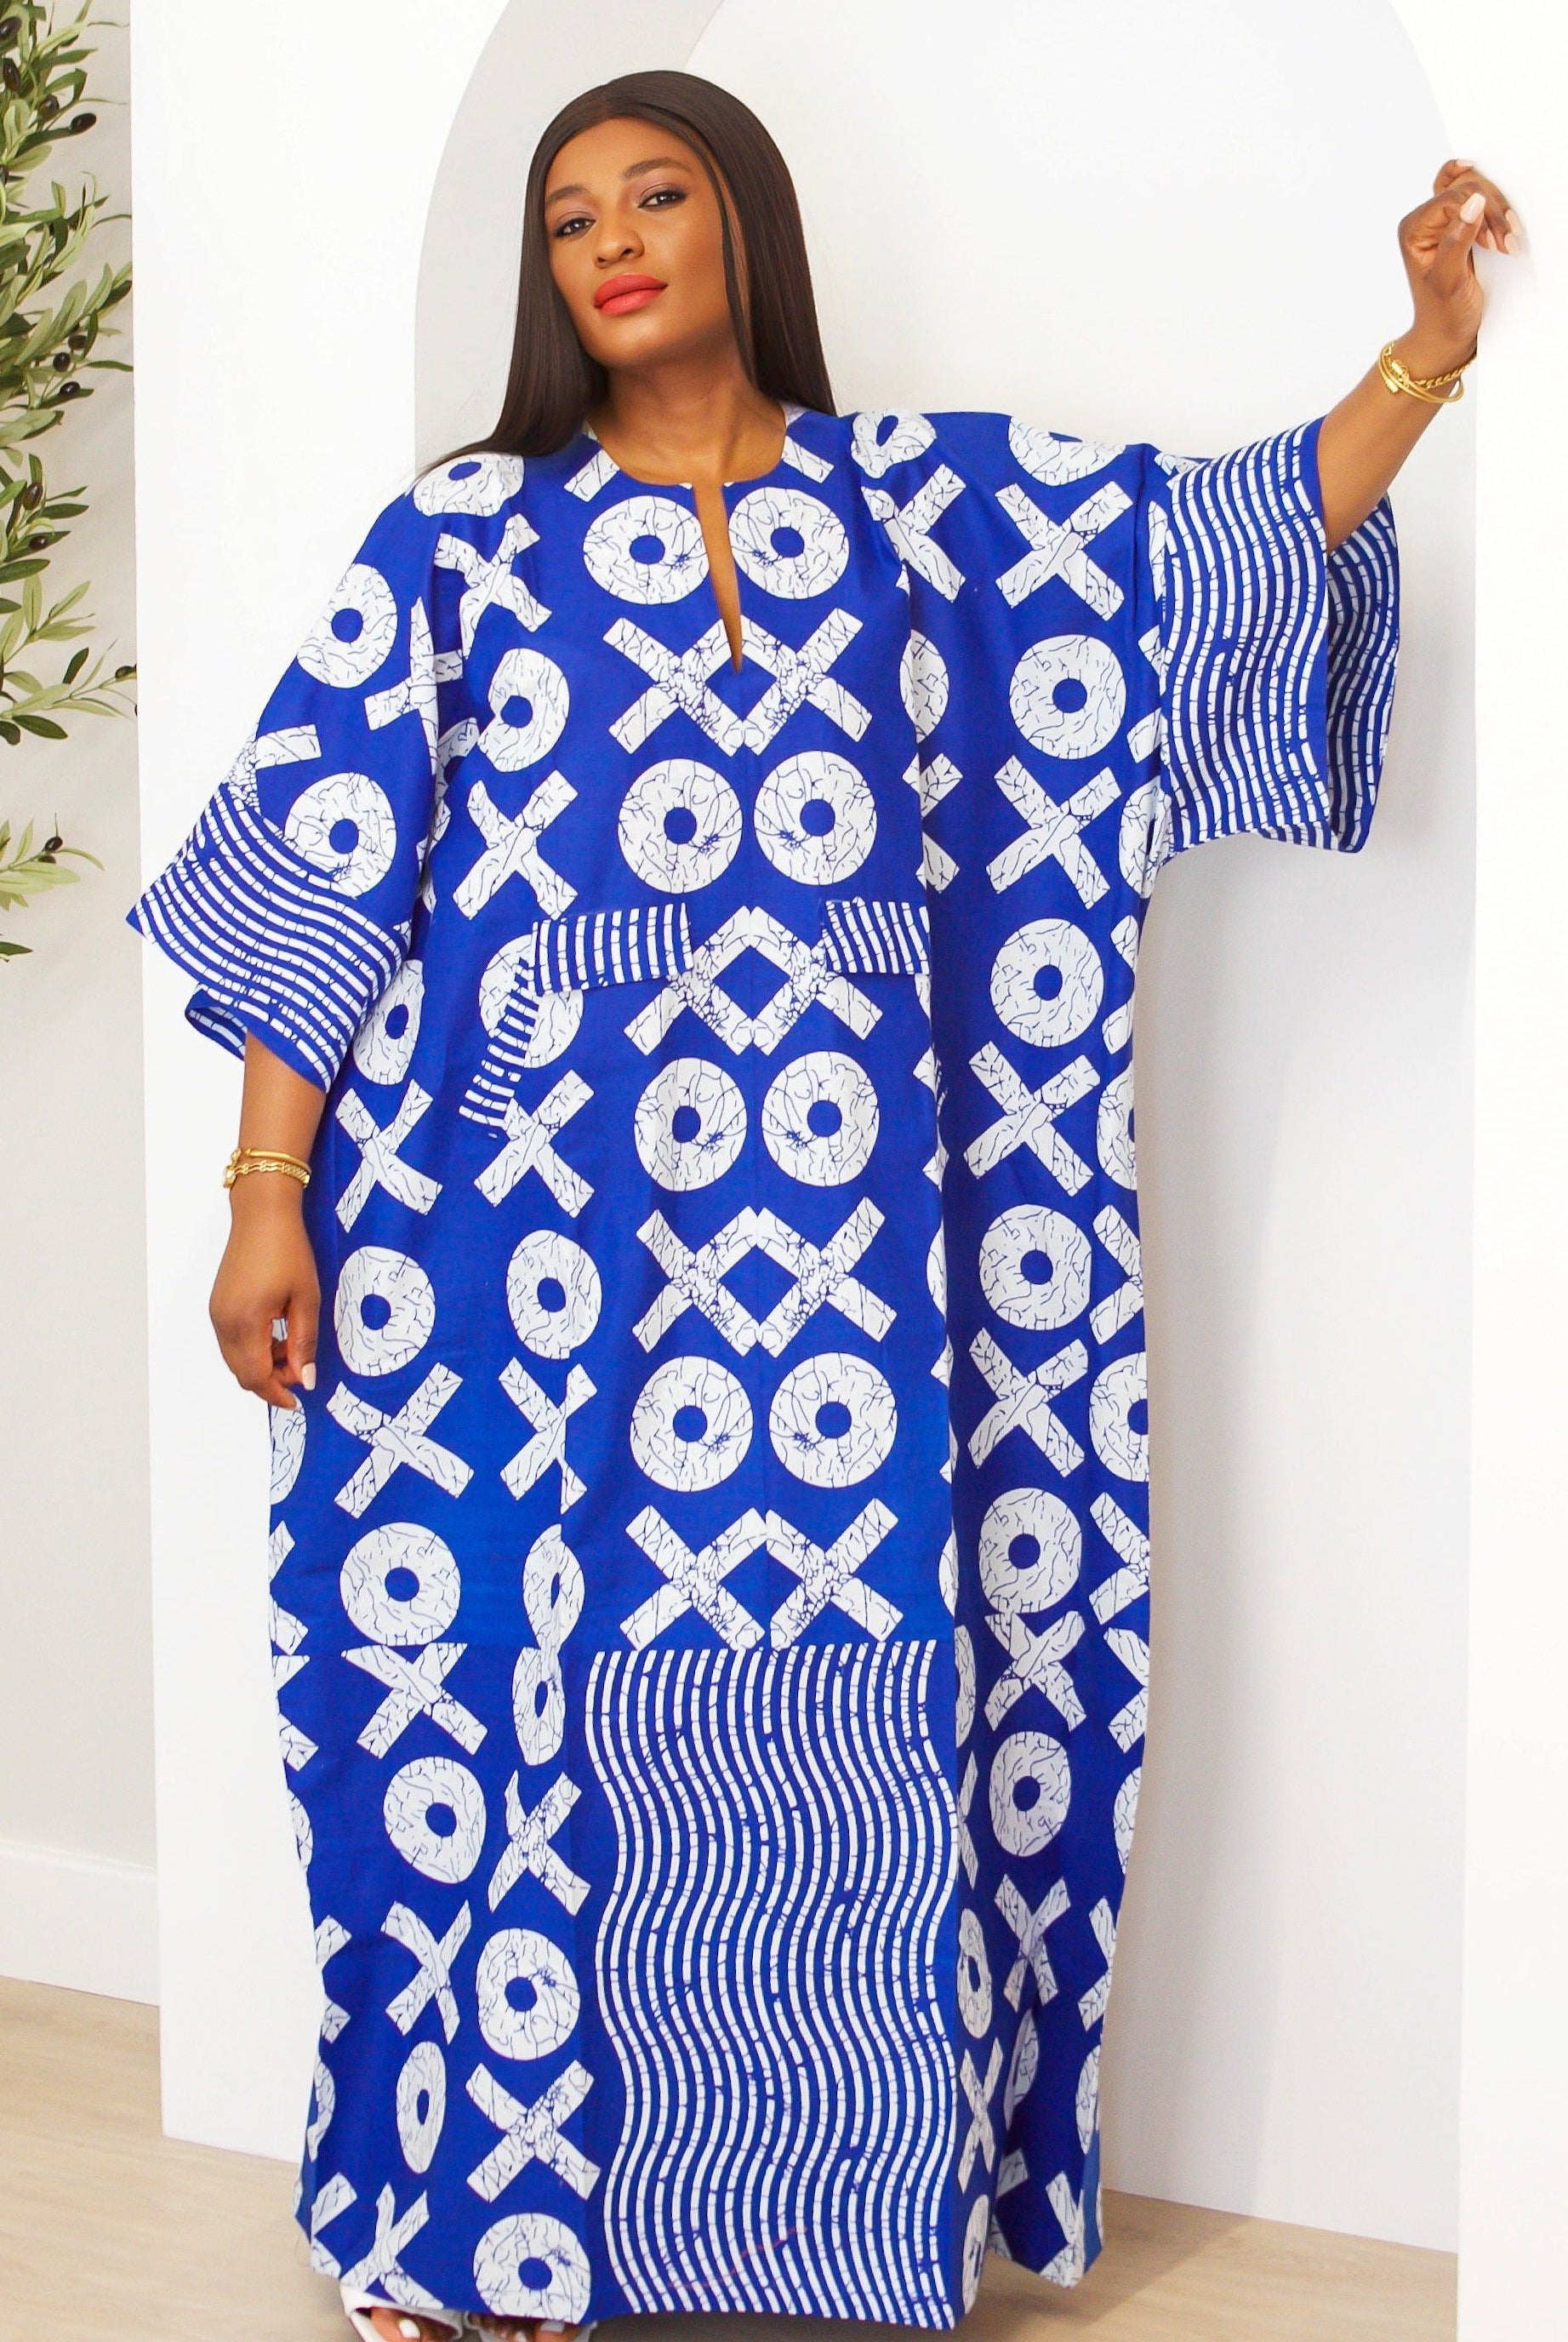 Shop CUMO London : African Clothing, African Dresses, African